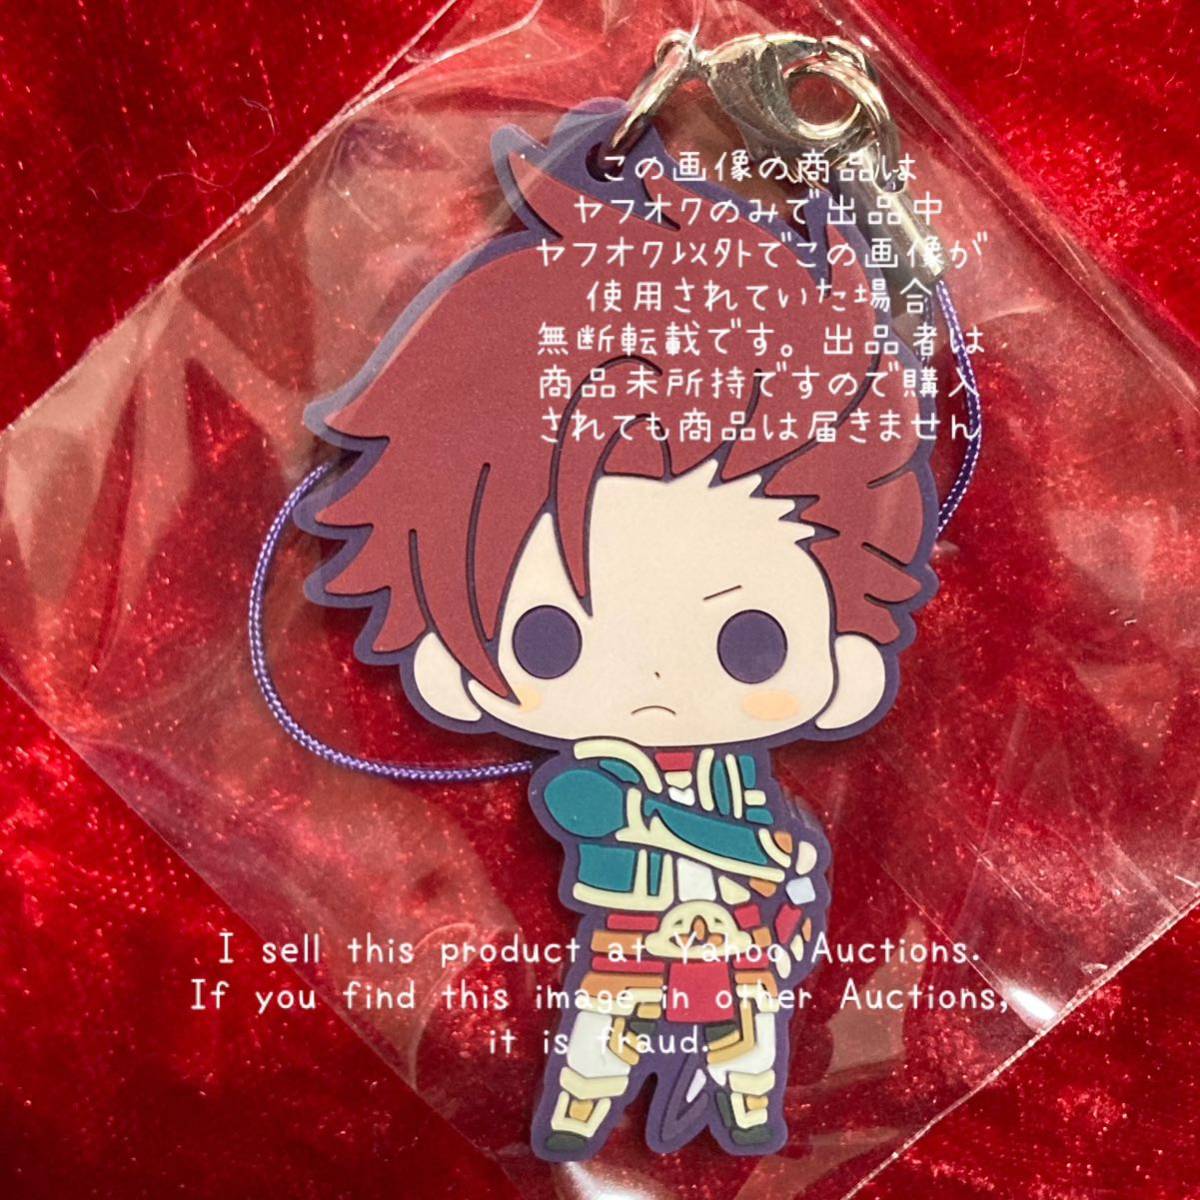 [ Tales ob series ] Raver strap collection Tales obf lens rubber strap / Lloyd *a- vi ngsimf.niaTOS